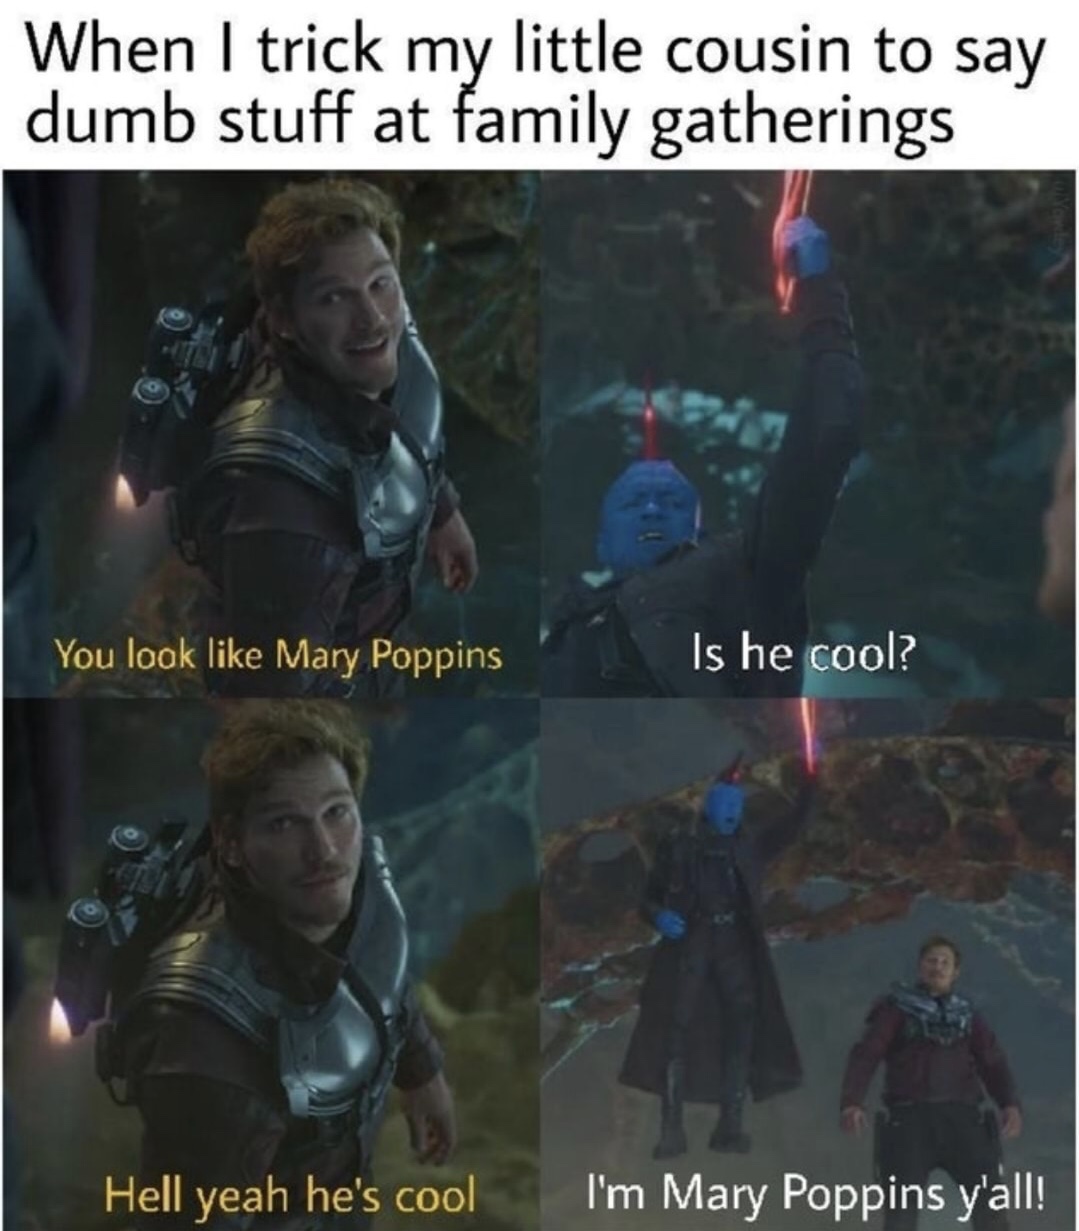 i m marry poppins yall meme - When I trick my little cousin to say dumb stuff at family gatherings You look Mary Poppins Is he cool? Hell yeah he's cool I'm Mary Poppins y'all!